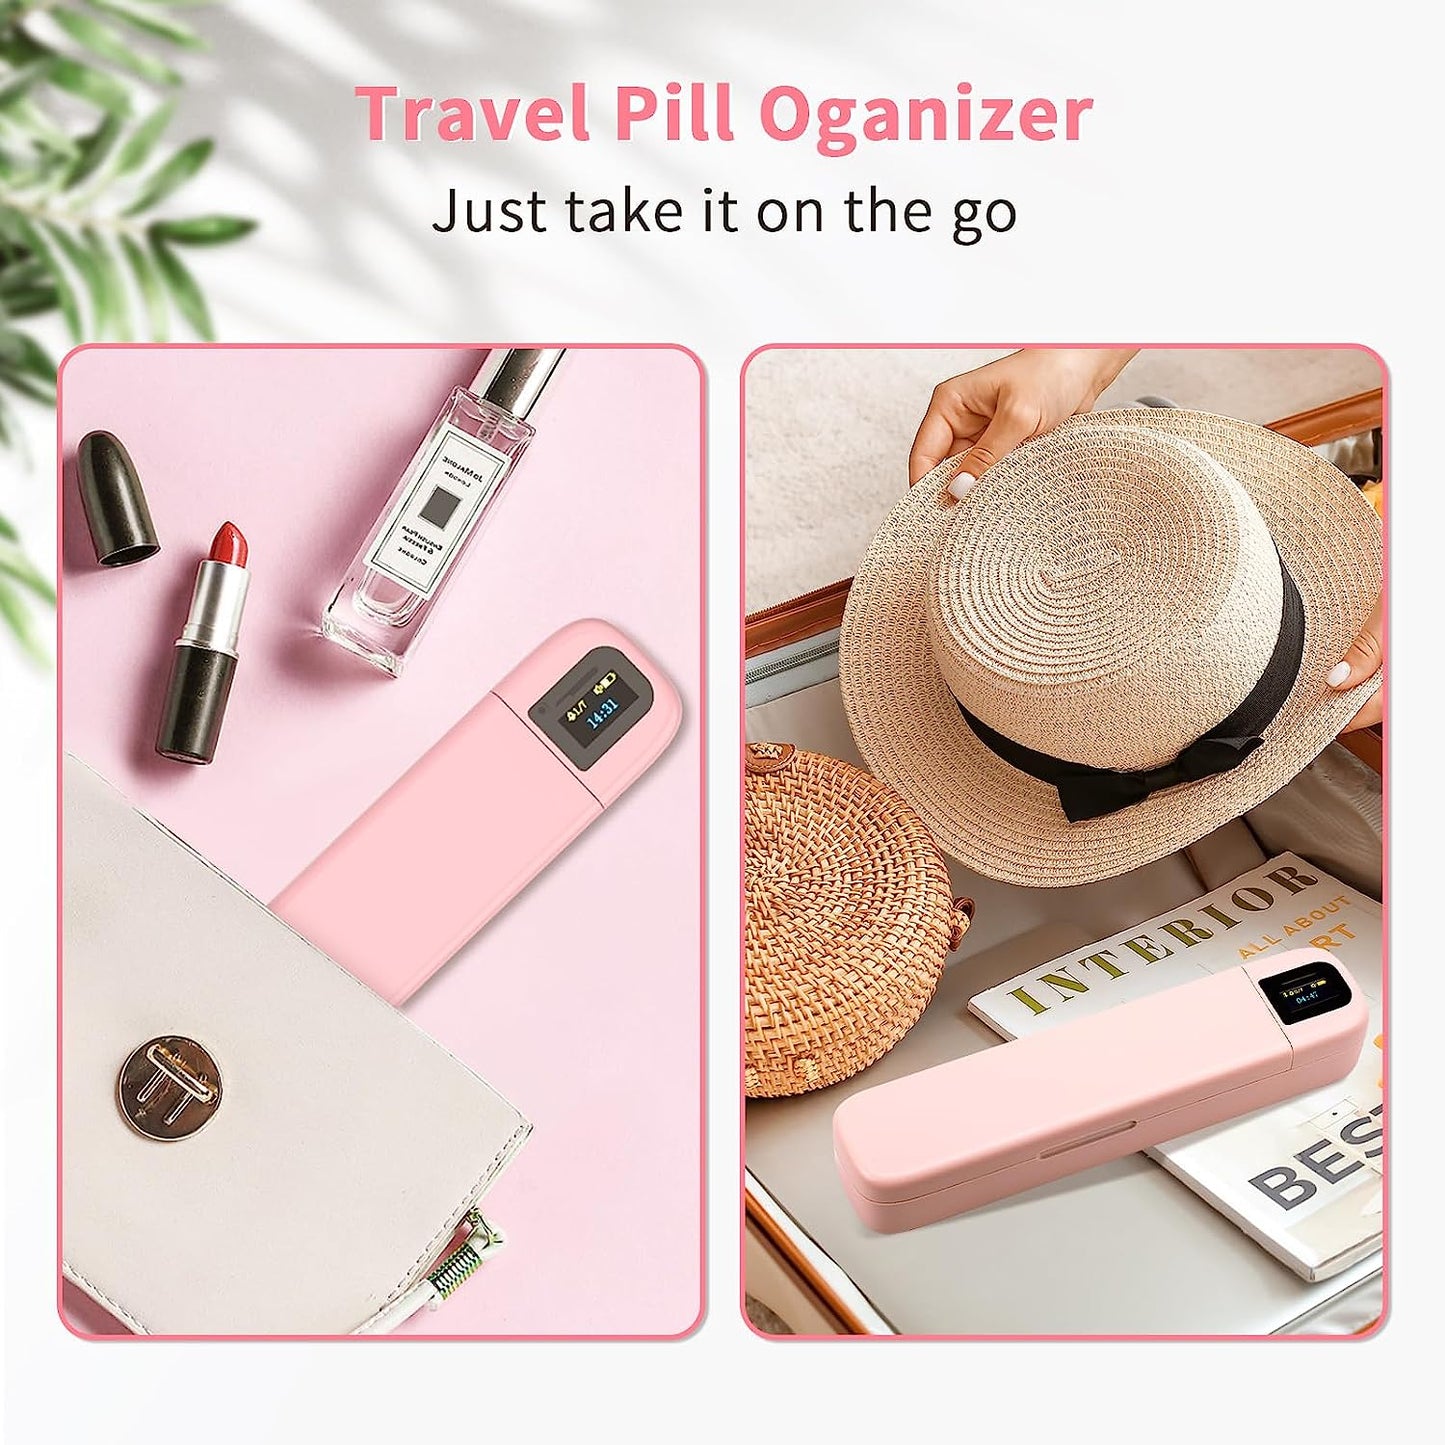 Weekly Bluetooth Electronic Pill Case 1 Time a Day for Travel